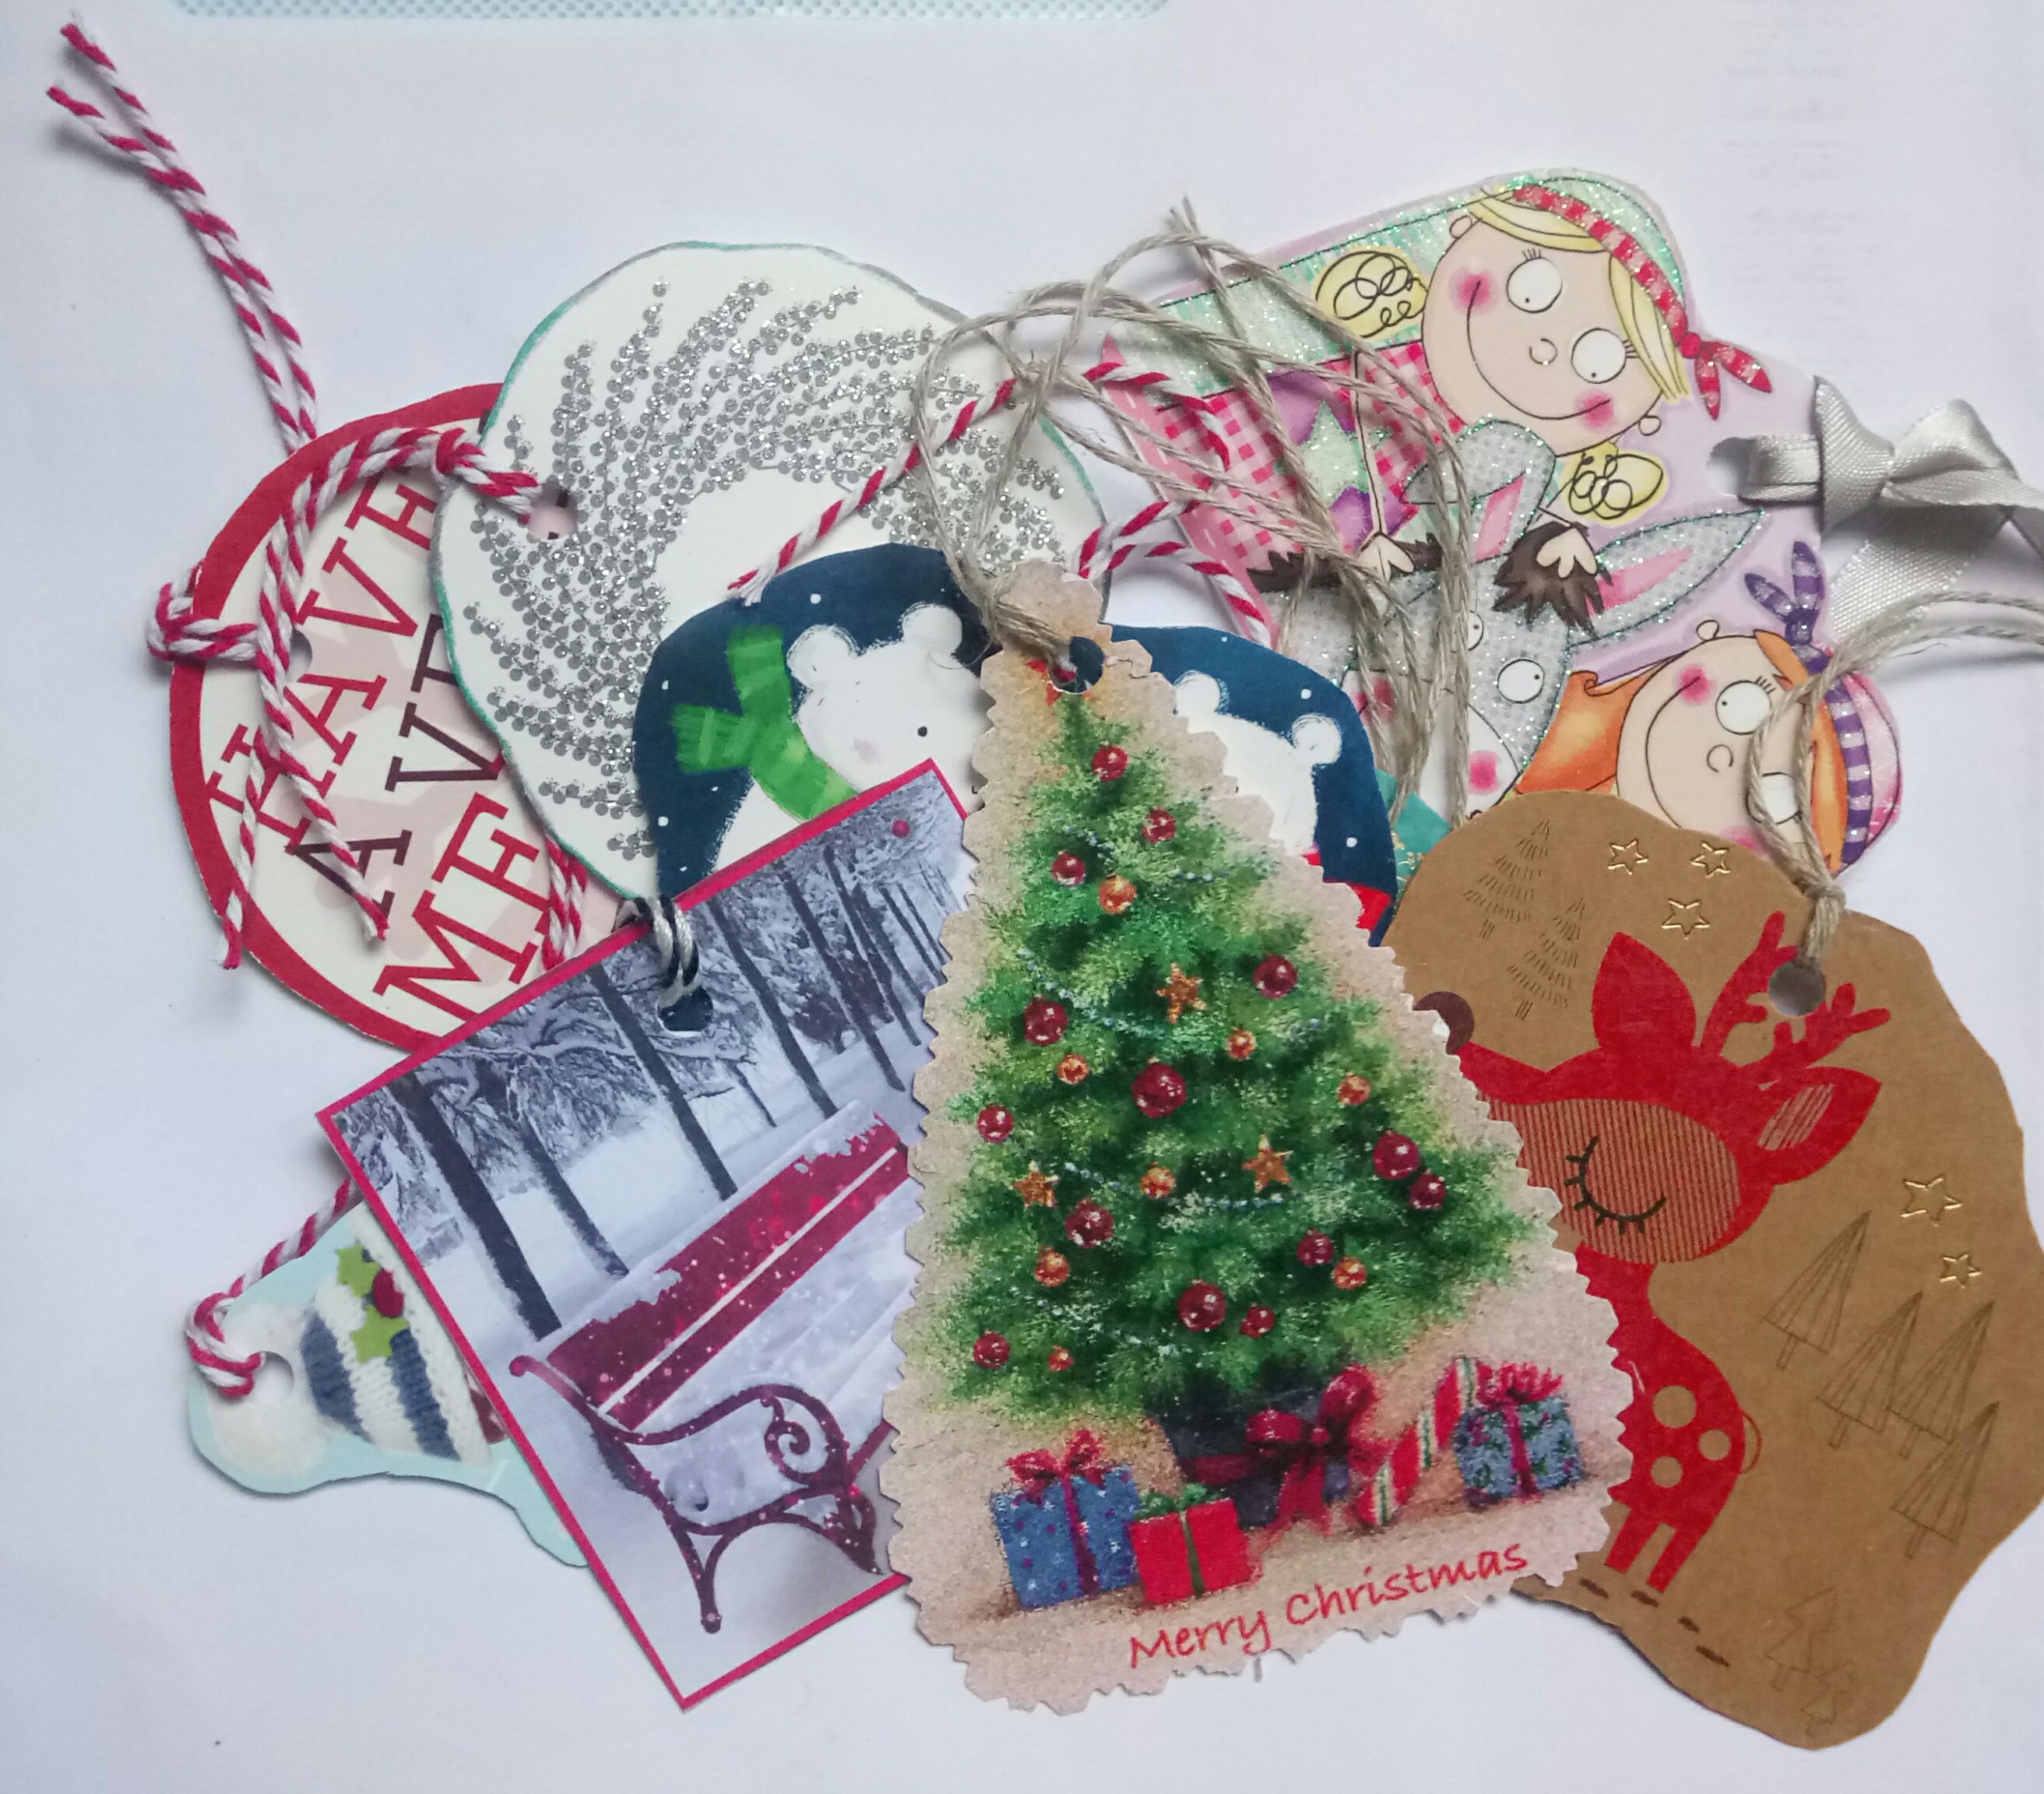 New From Old: Recycle Your Greetings Cards Into Next Year’s Cards and Gift Tags